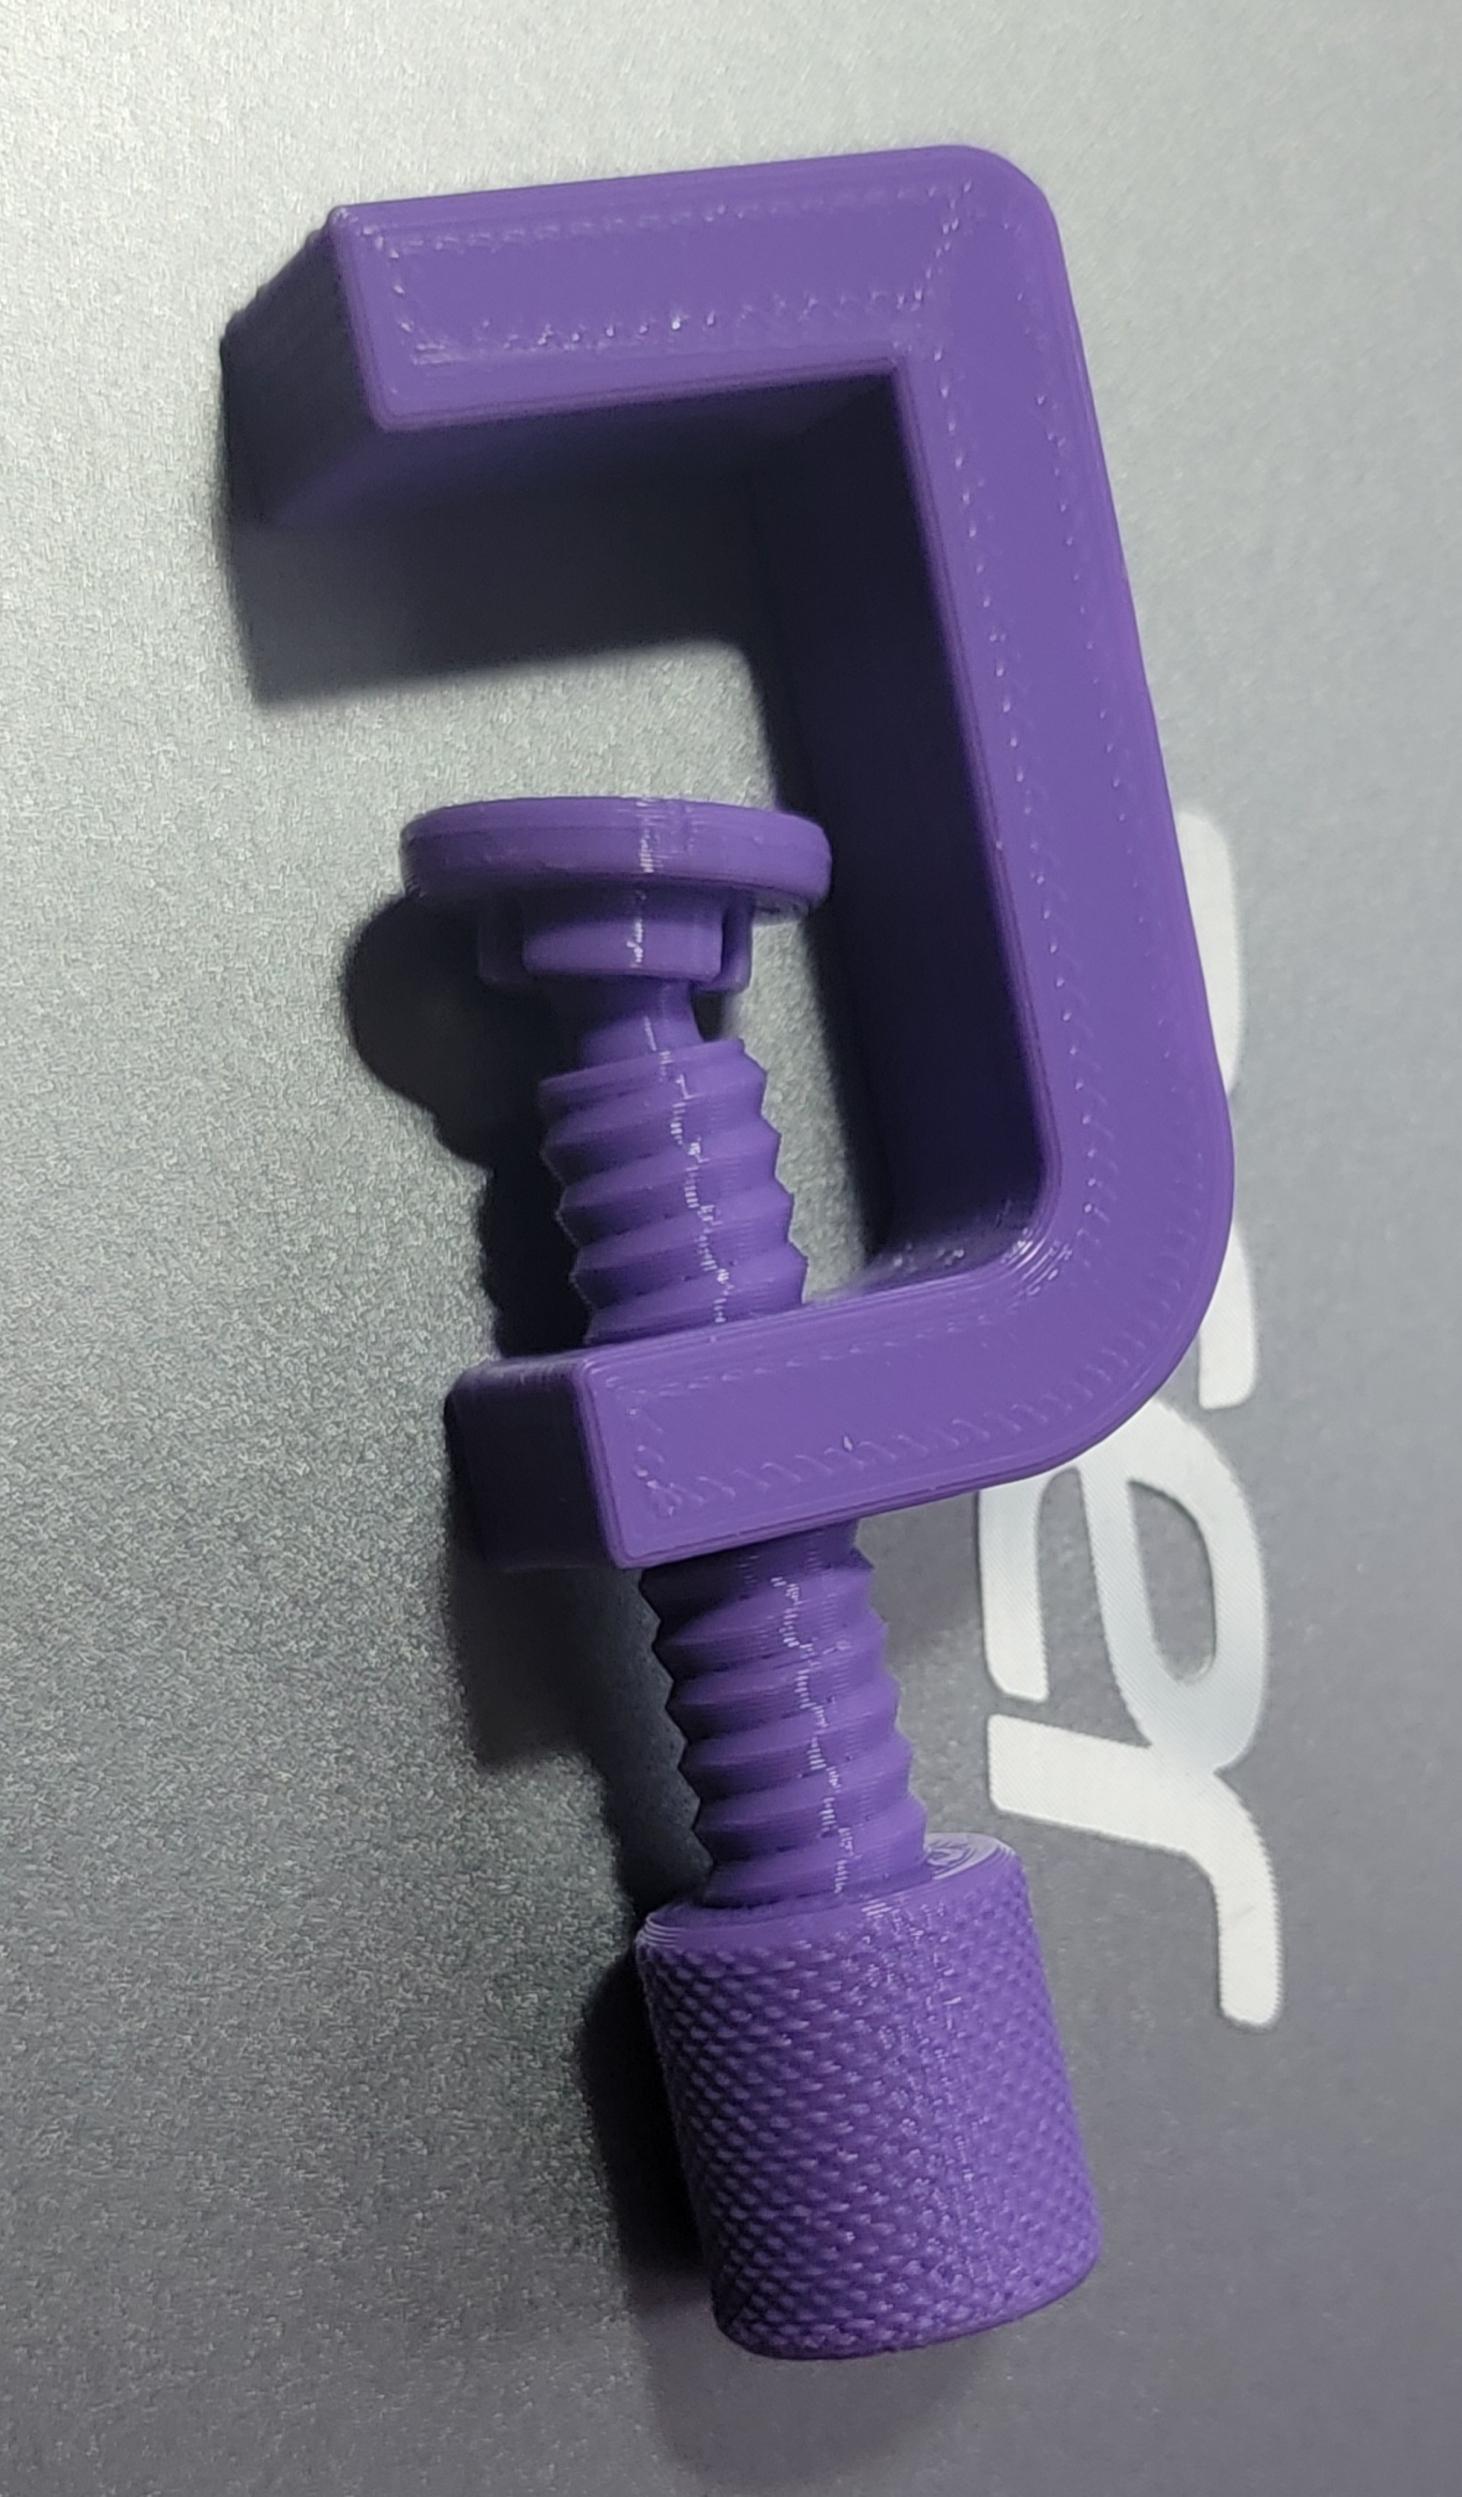 USB Holder Clamp - Reduced the size, USB will not fit now, just liked the smaller clamp.
Lotmaxx Shark V2 
GST3D PLA+ - 3d model